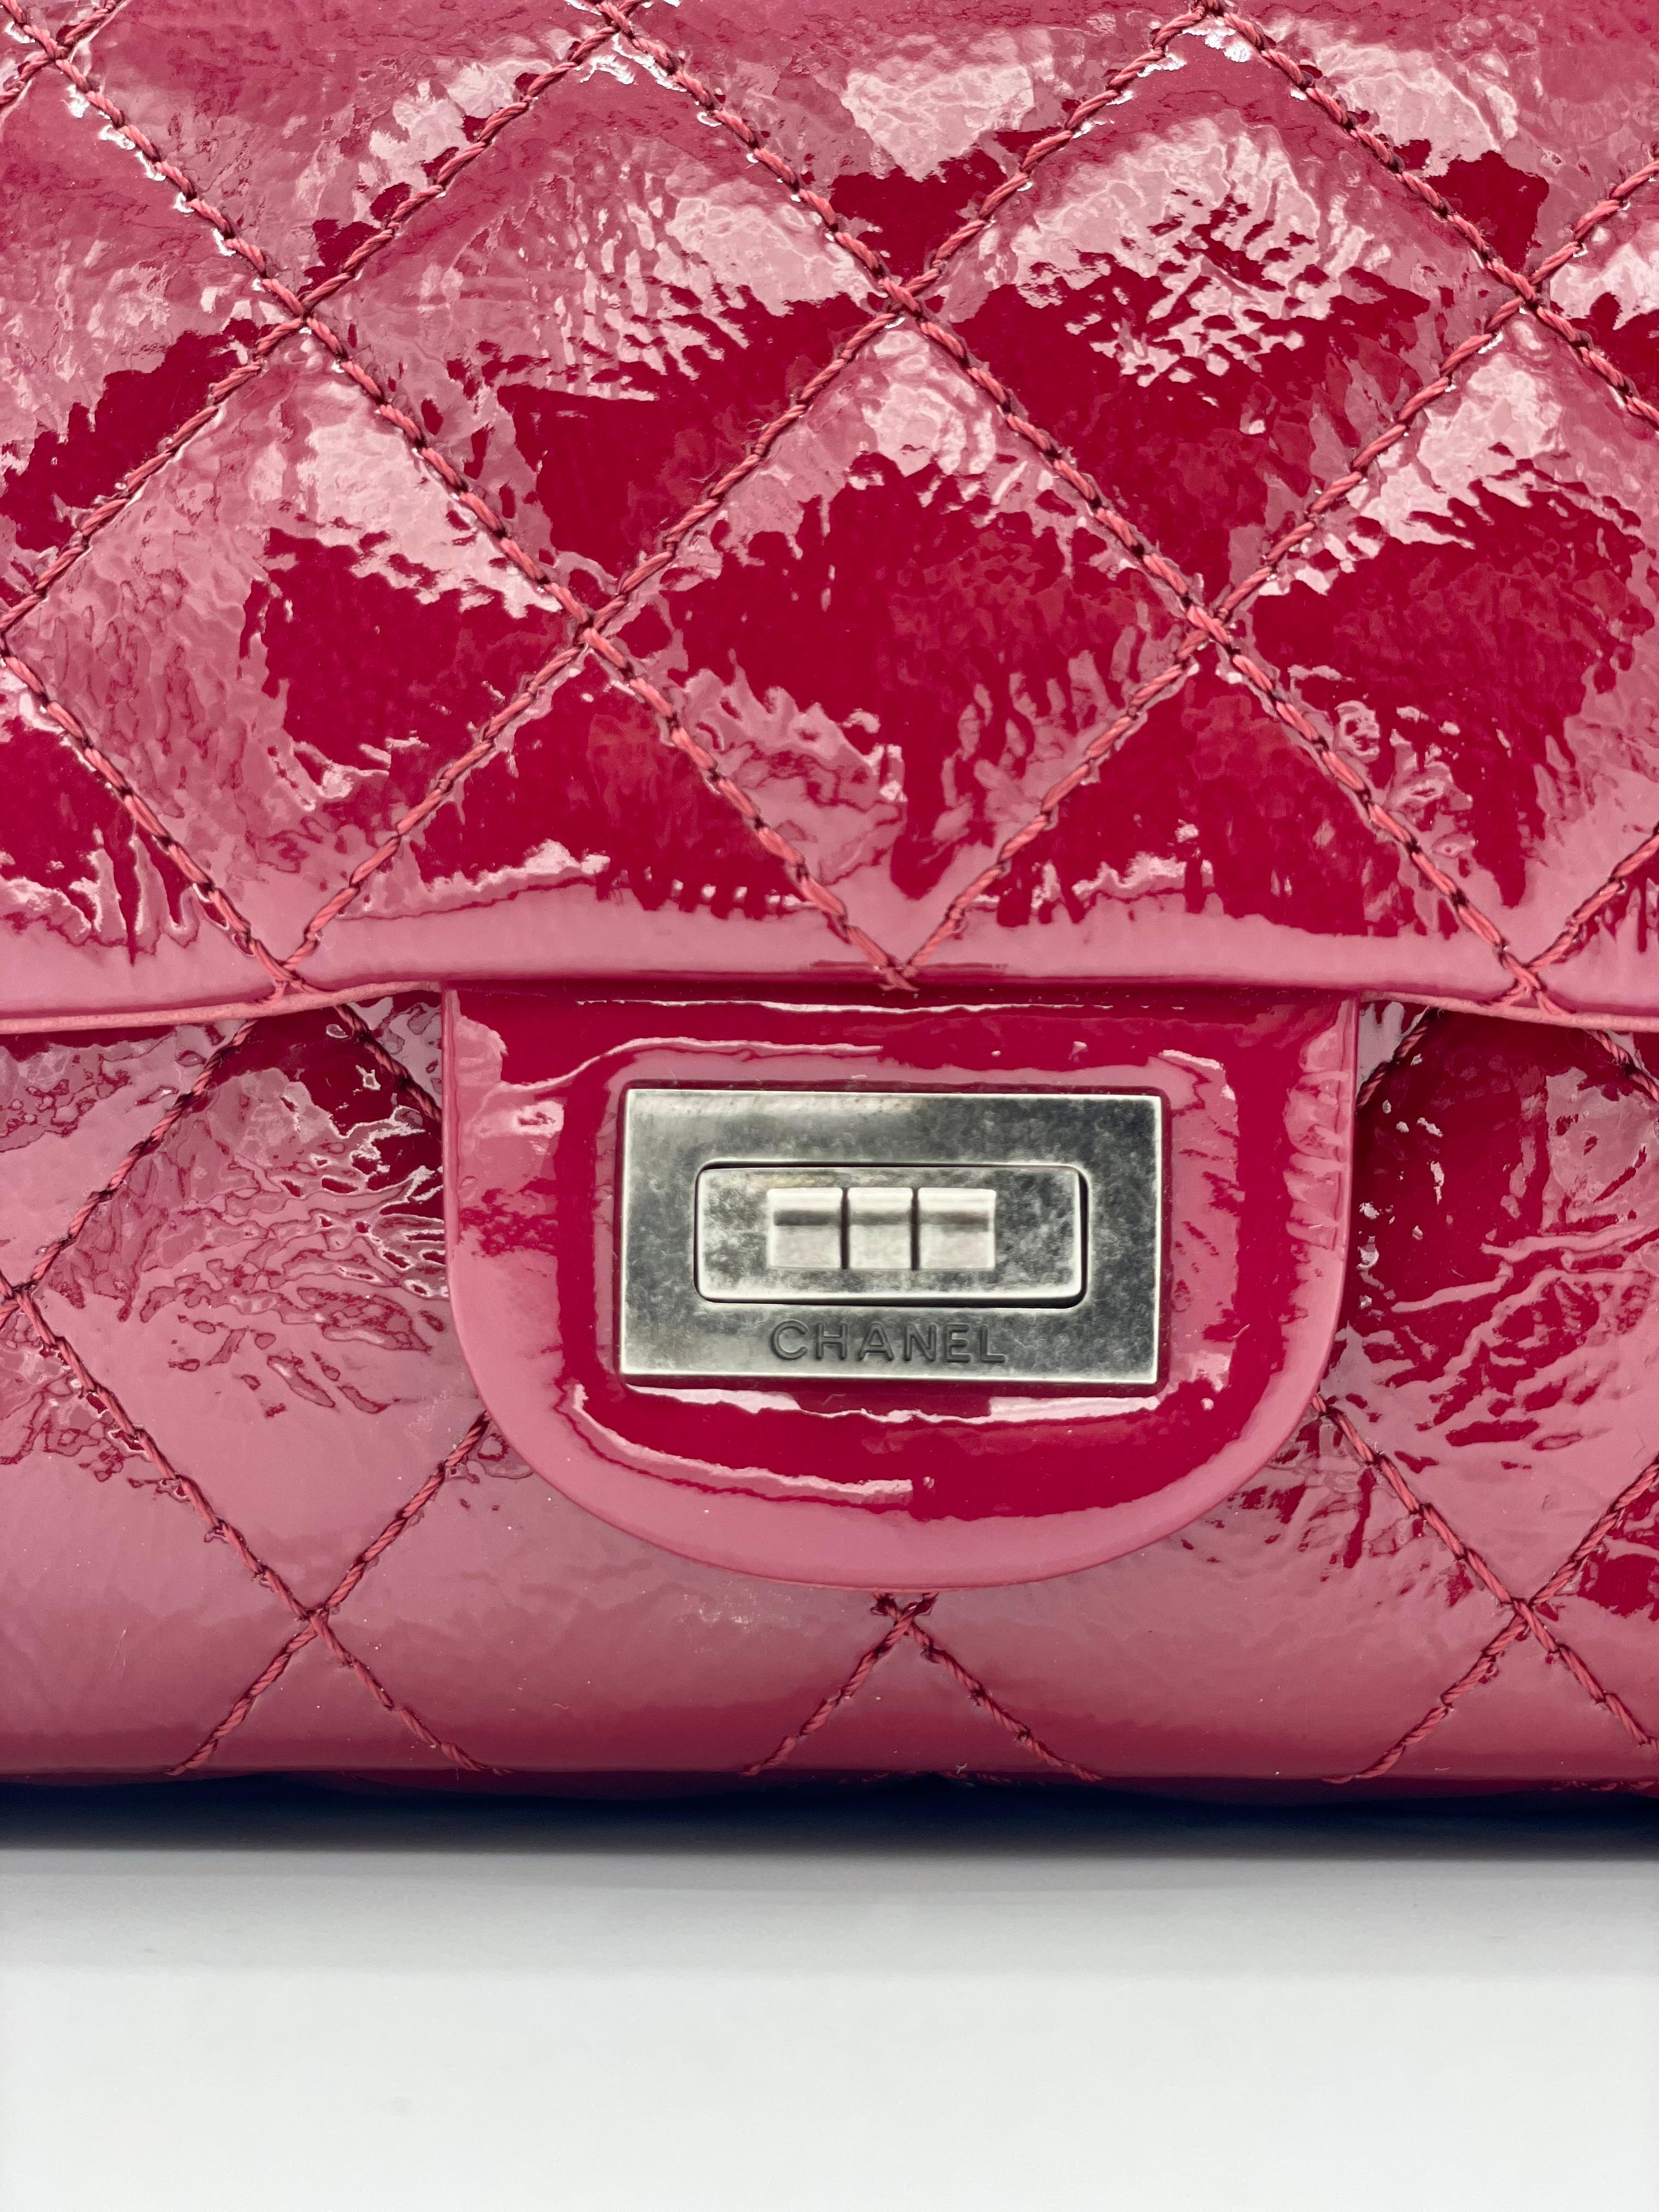 2010-2011 Chanel Patent Leather Quilted Red 2.55 Reissue 225. Red patent leather with quilting, encircled by silver hardware. 
It also includes Coco Chanel's Mademoiselle Lock. The two flaps open to reveal a grey leather-lined inside with a 